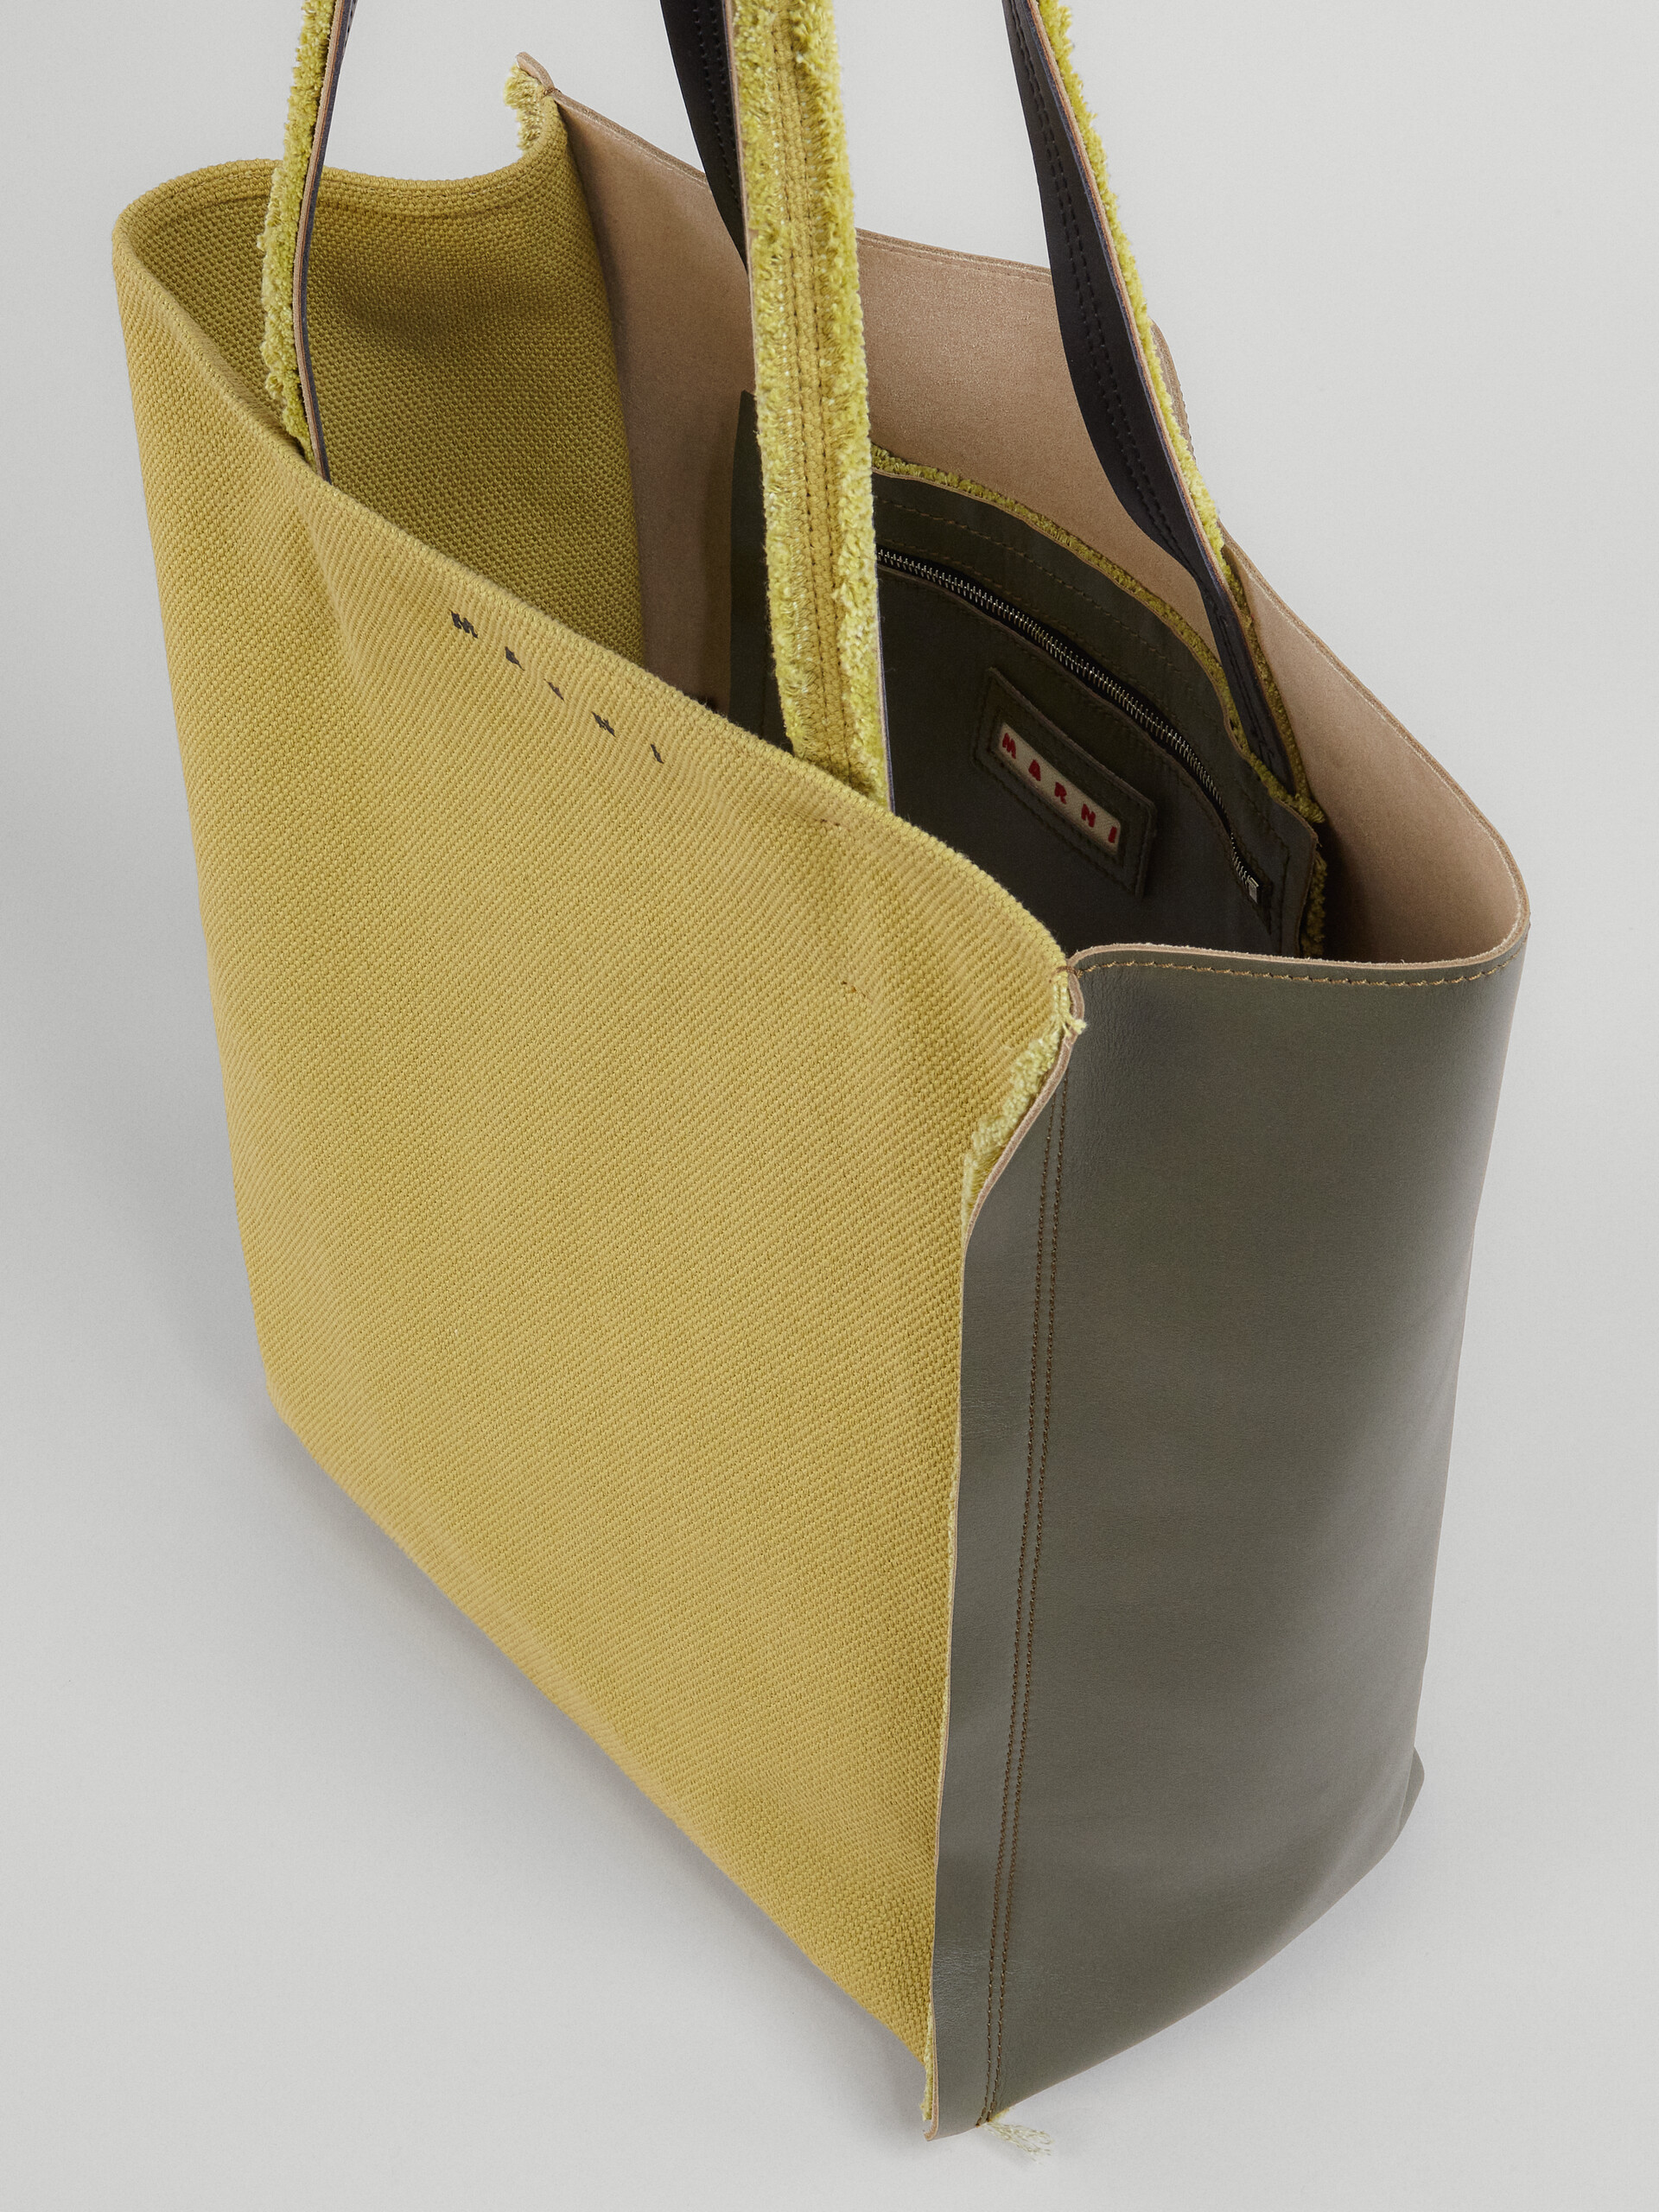 Yellow and brown leather canvas MUSEO SOFT  bag - Shopping Bags - Image 5